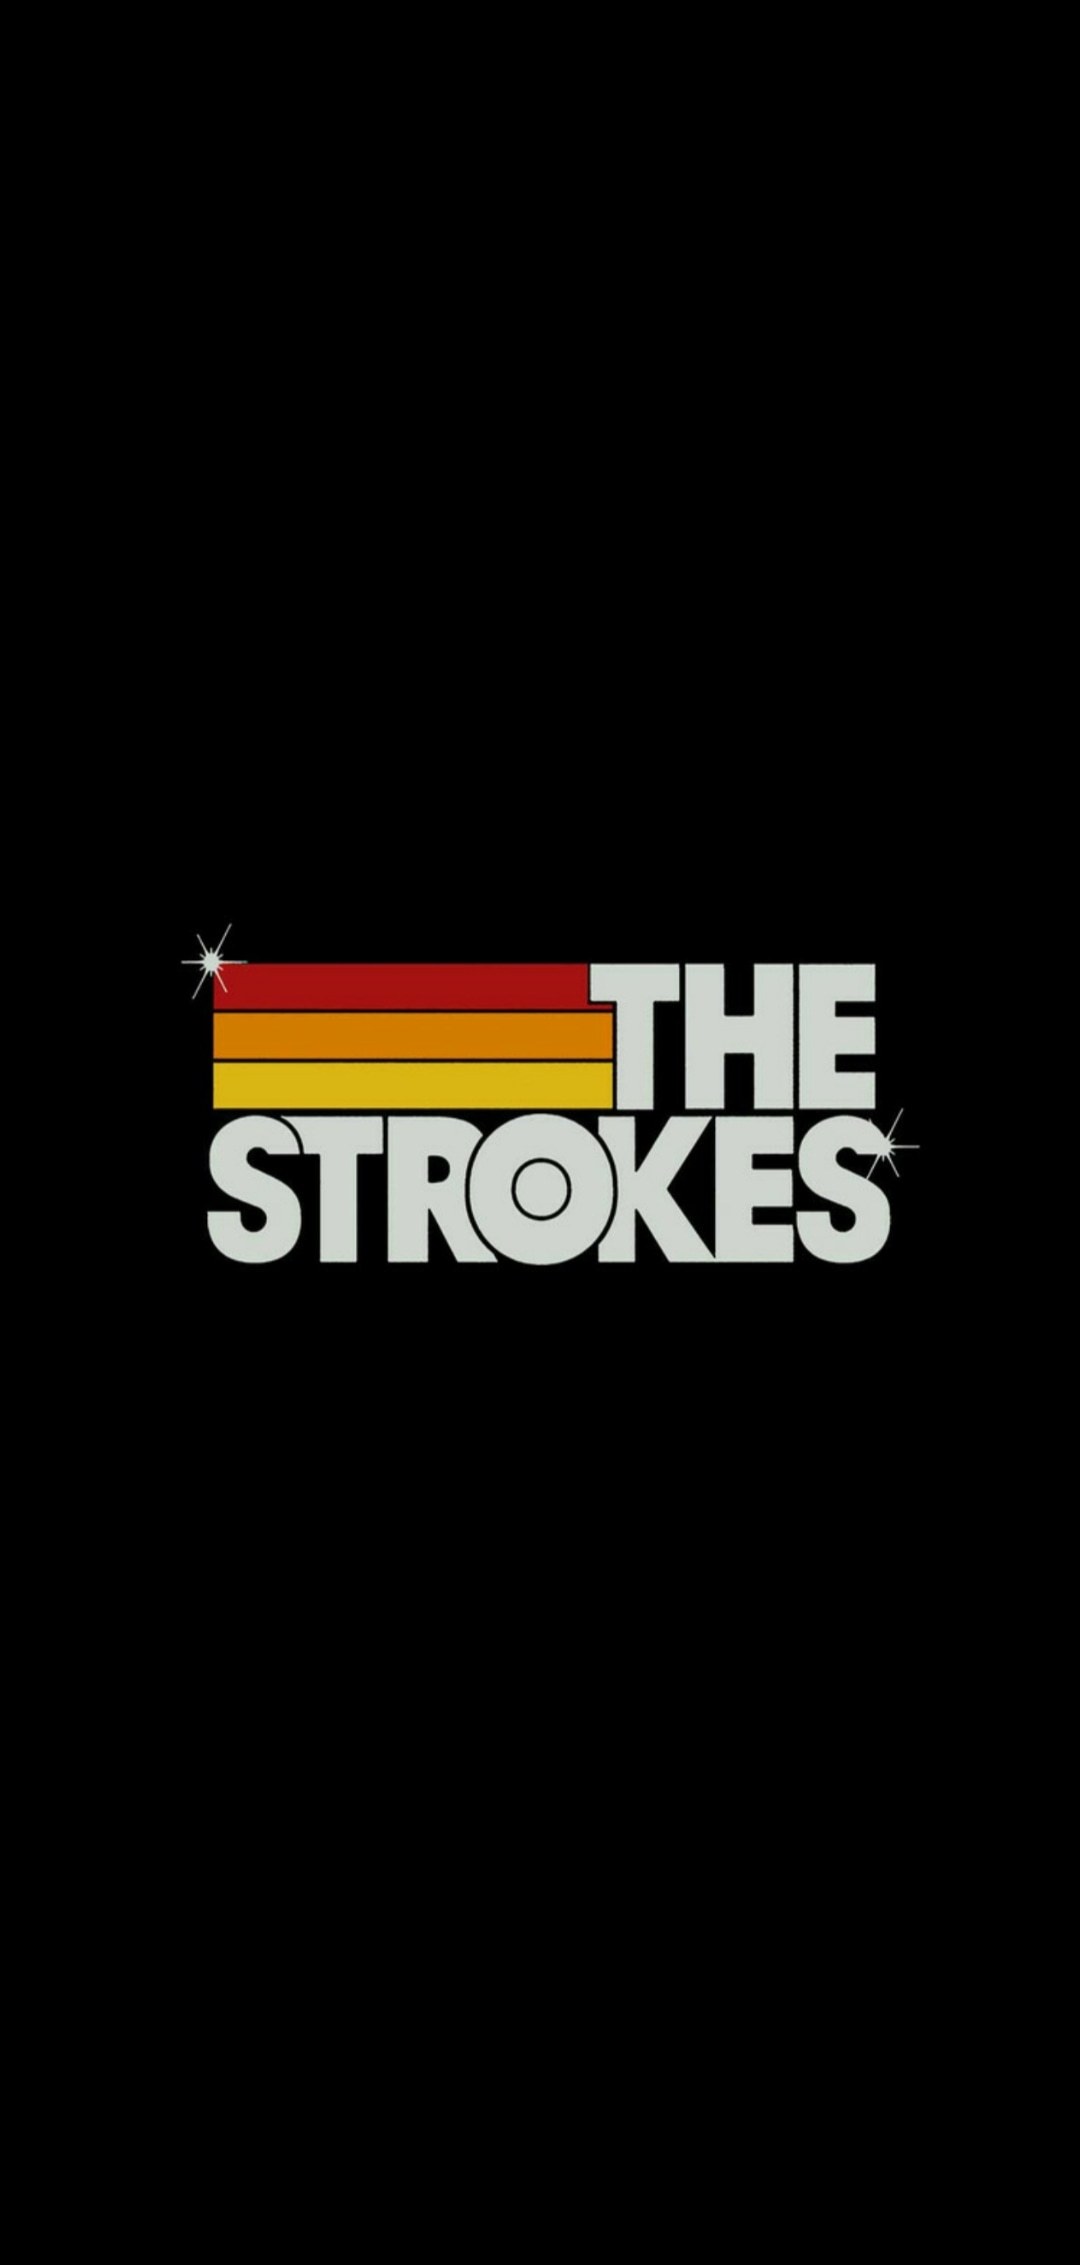 The Strokes Wallpaper by tink44 on DeviantArt